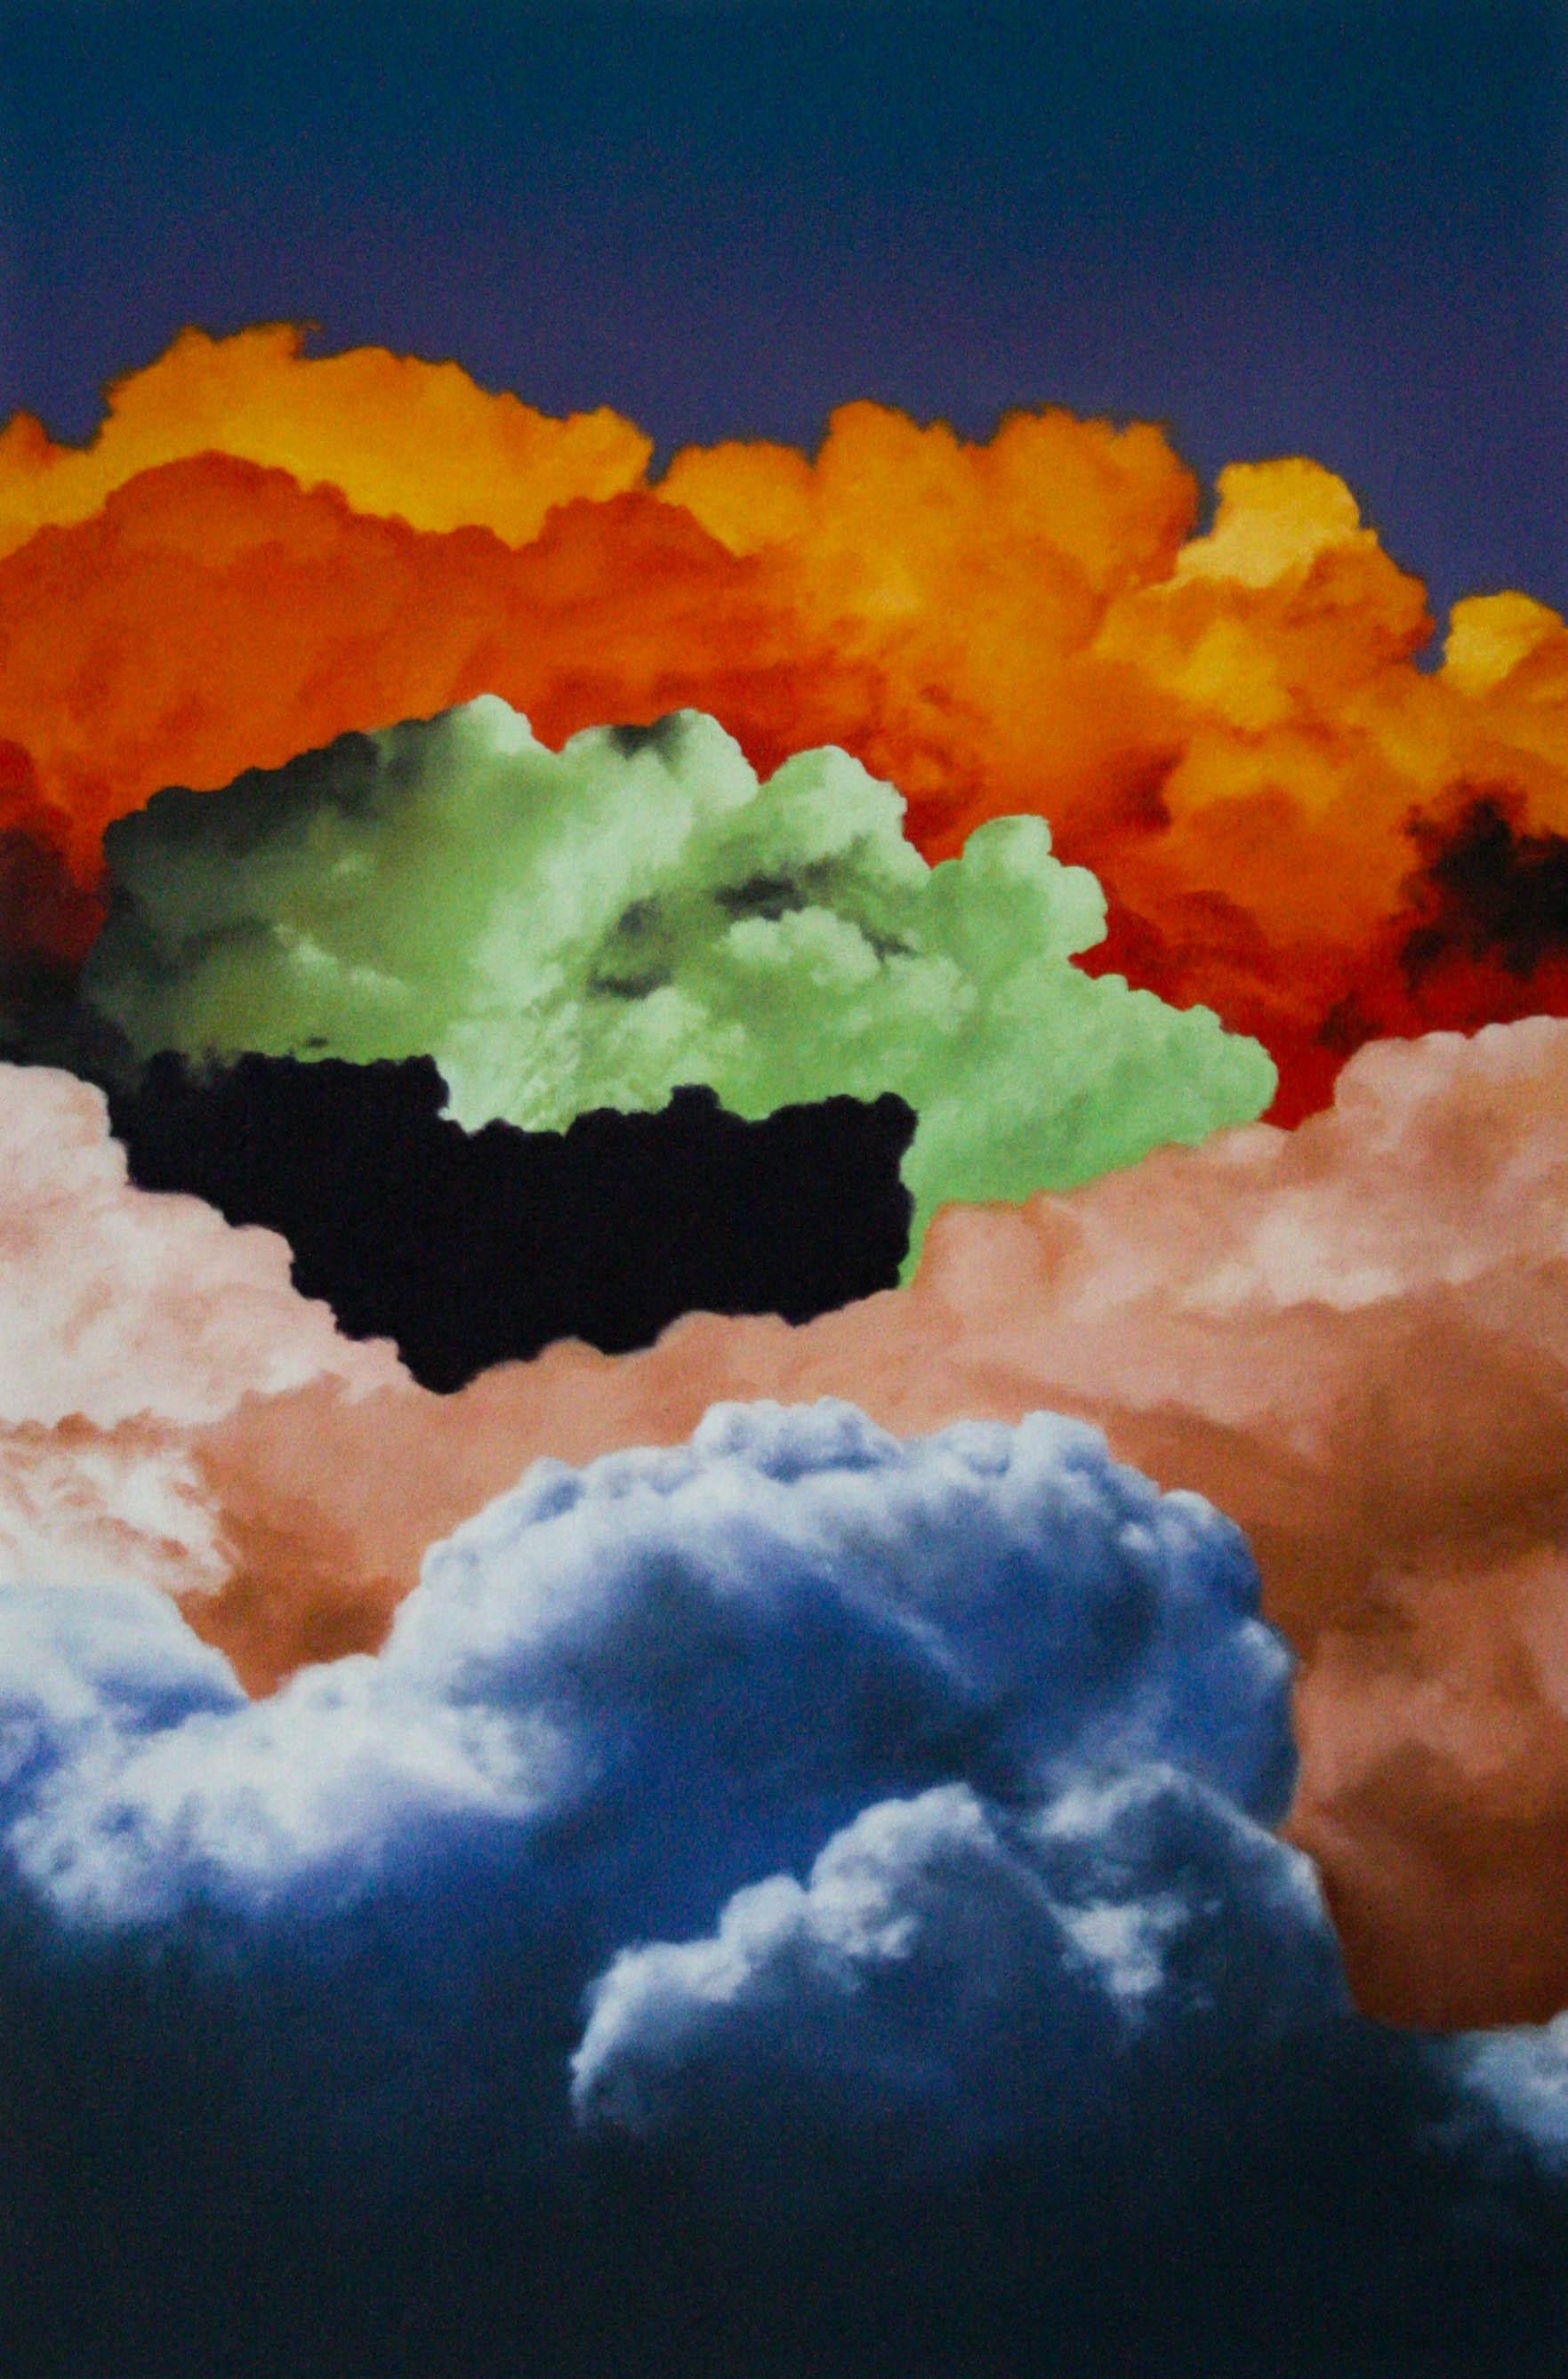 Hey You- Canvas, Oil Paint, Skyscape, Orange, Green, Pink, Blue, Black, White - Painting by Julian Rogers